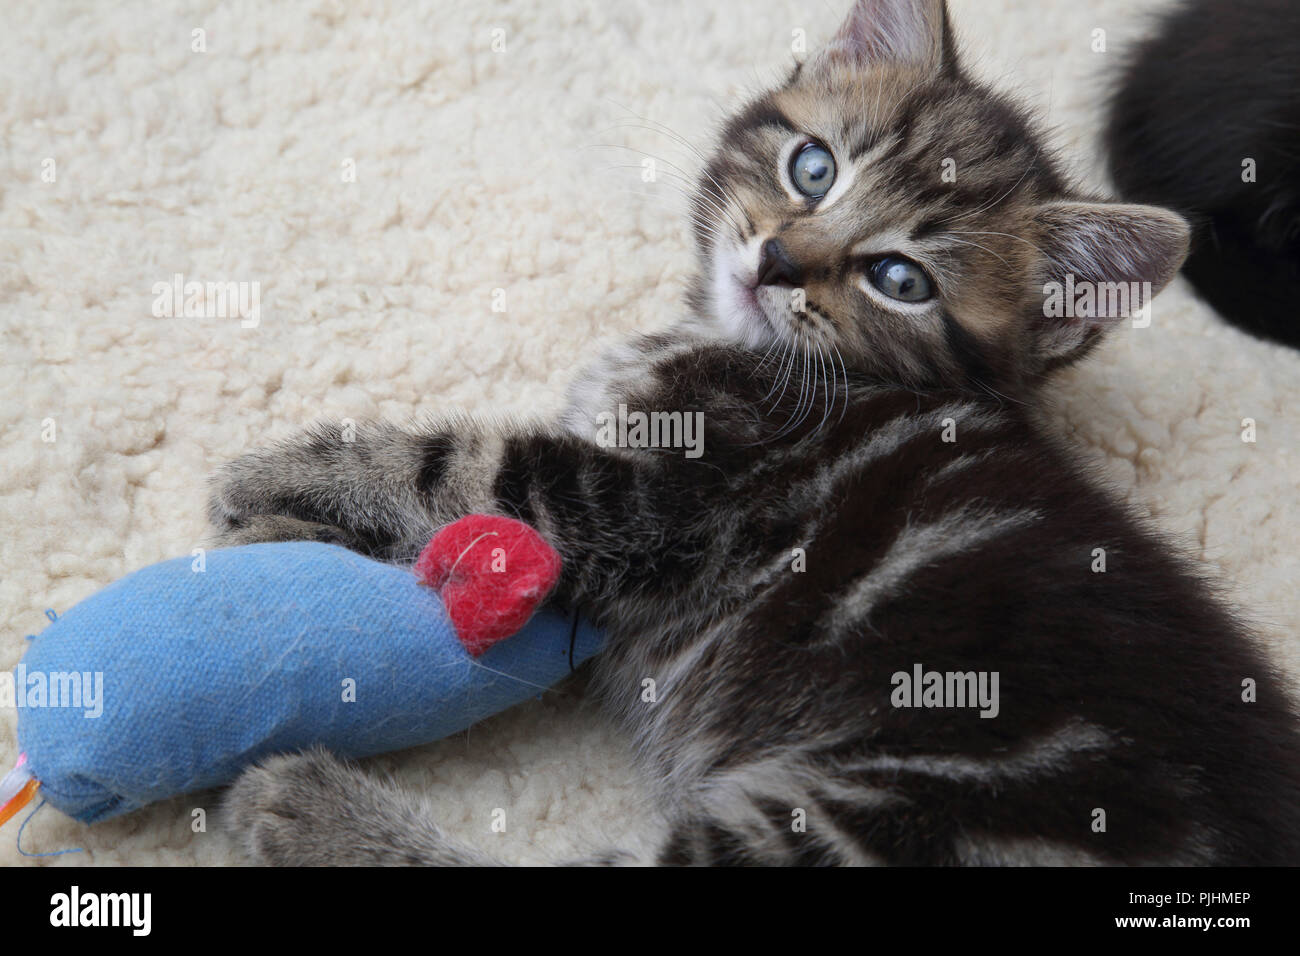 Sept semaines Tabby Kitten Playing with Toy Mouse Banque D'Images